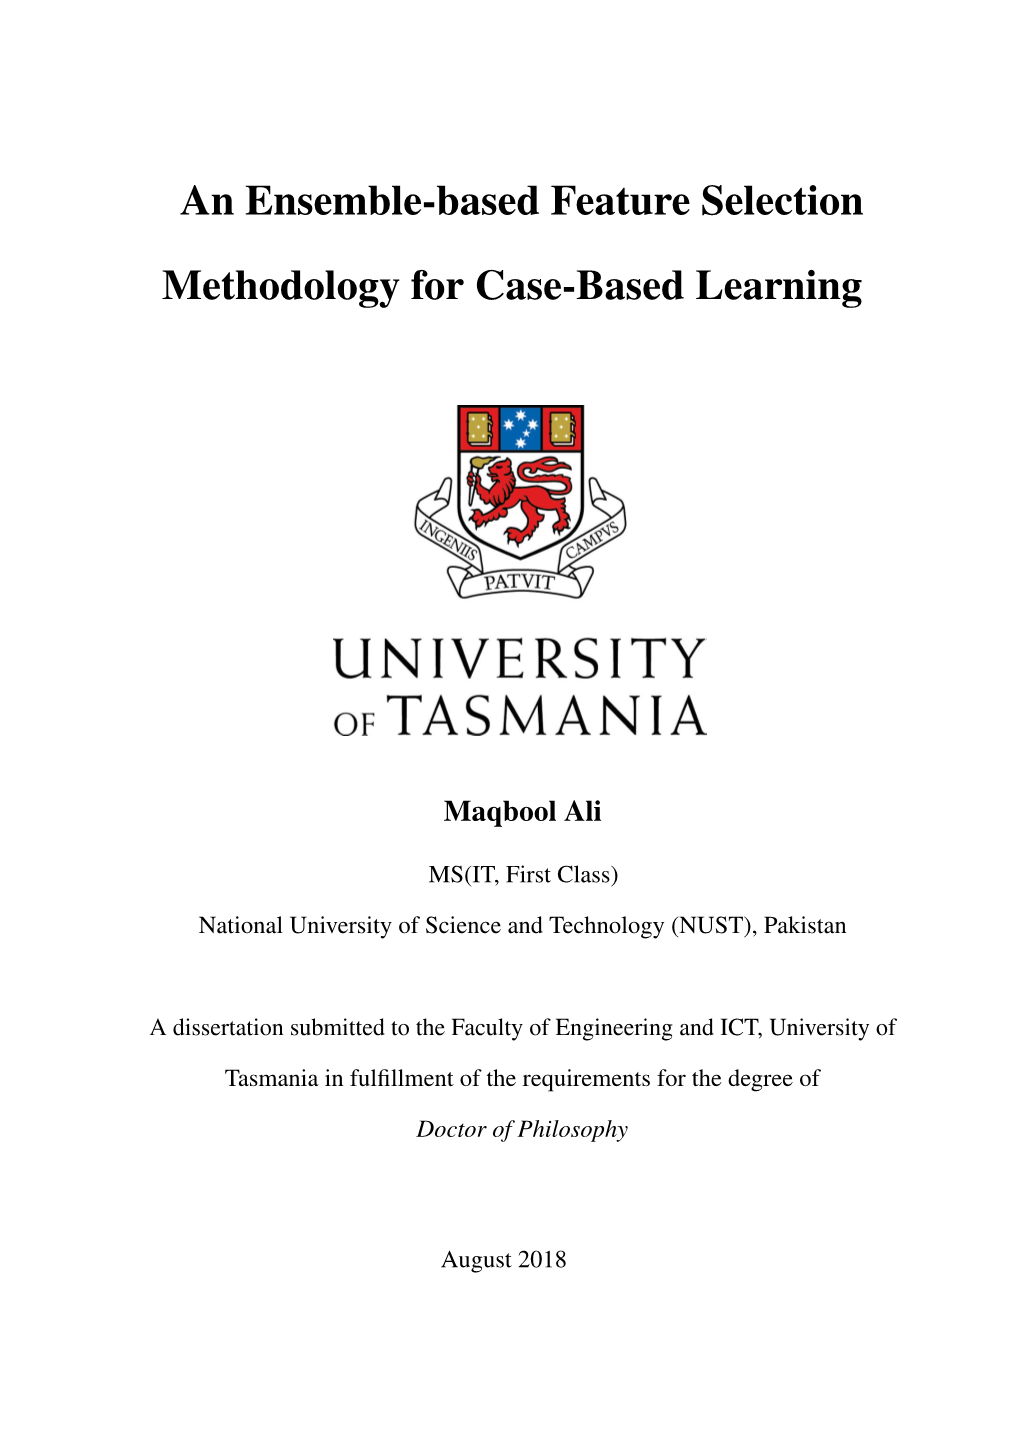 An Ensemble-Based Feature Selection Methodology for Case-Based Learning